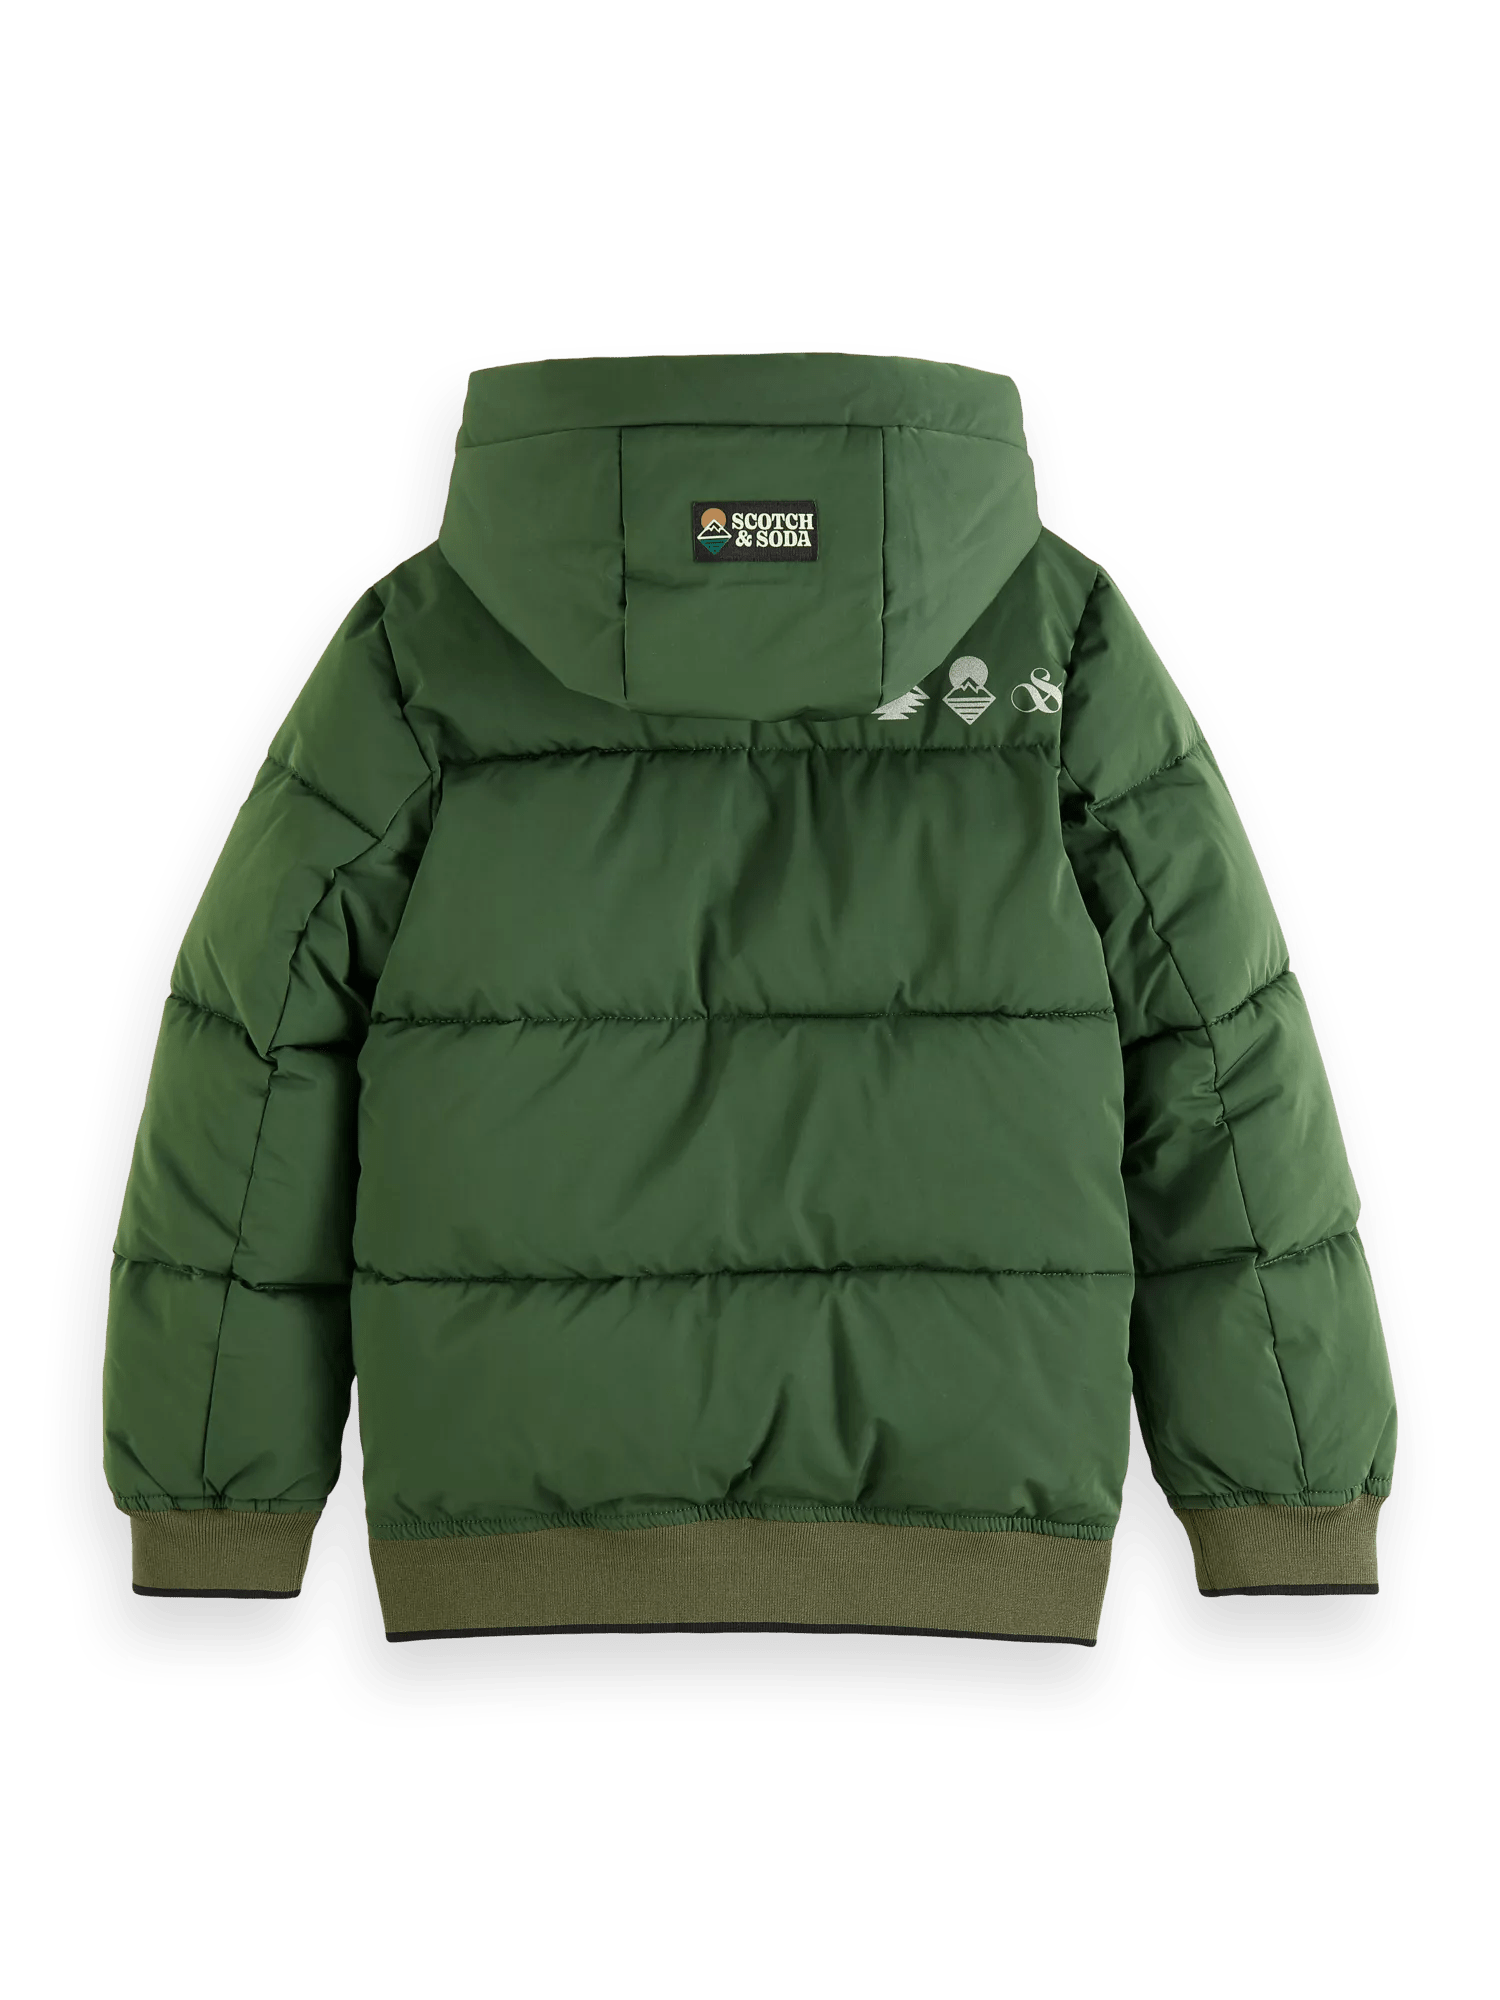 Hooded water-repellent puffer jacket